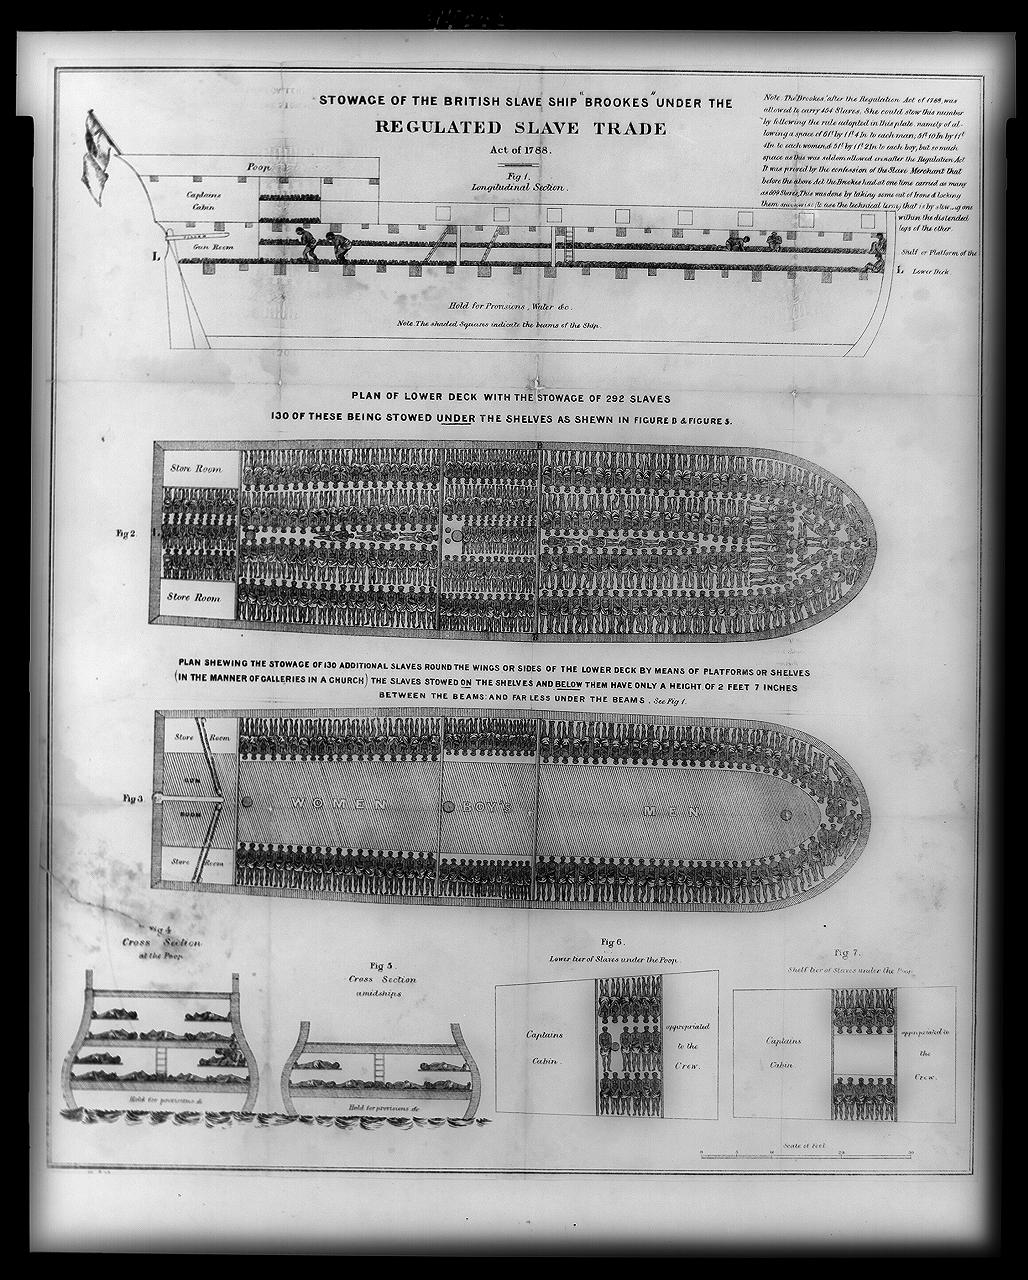 From LoC: "Illustration showing deck plans and cross sections of British slave ship Brookes."